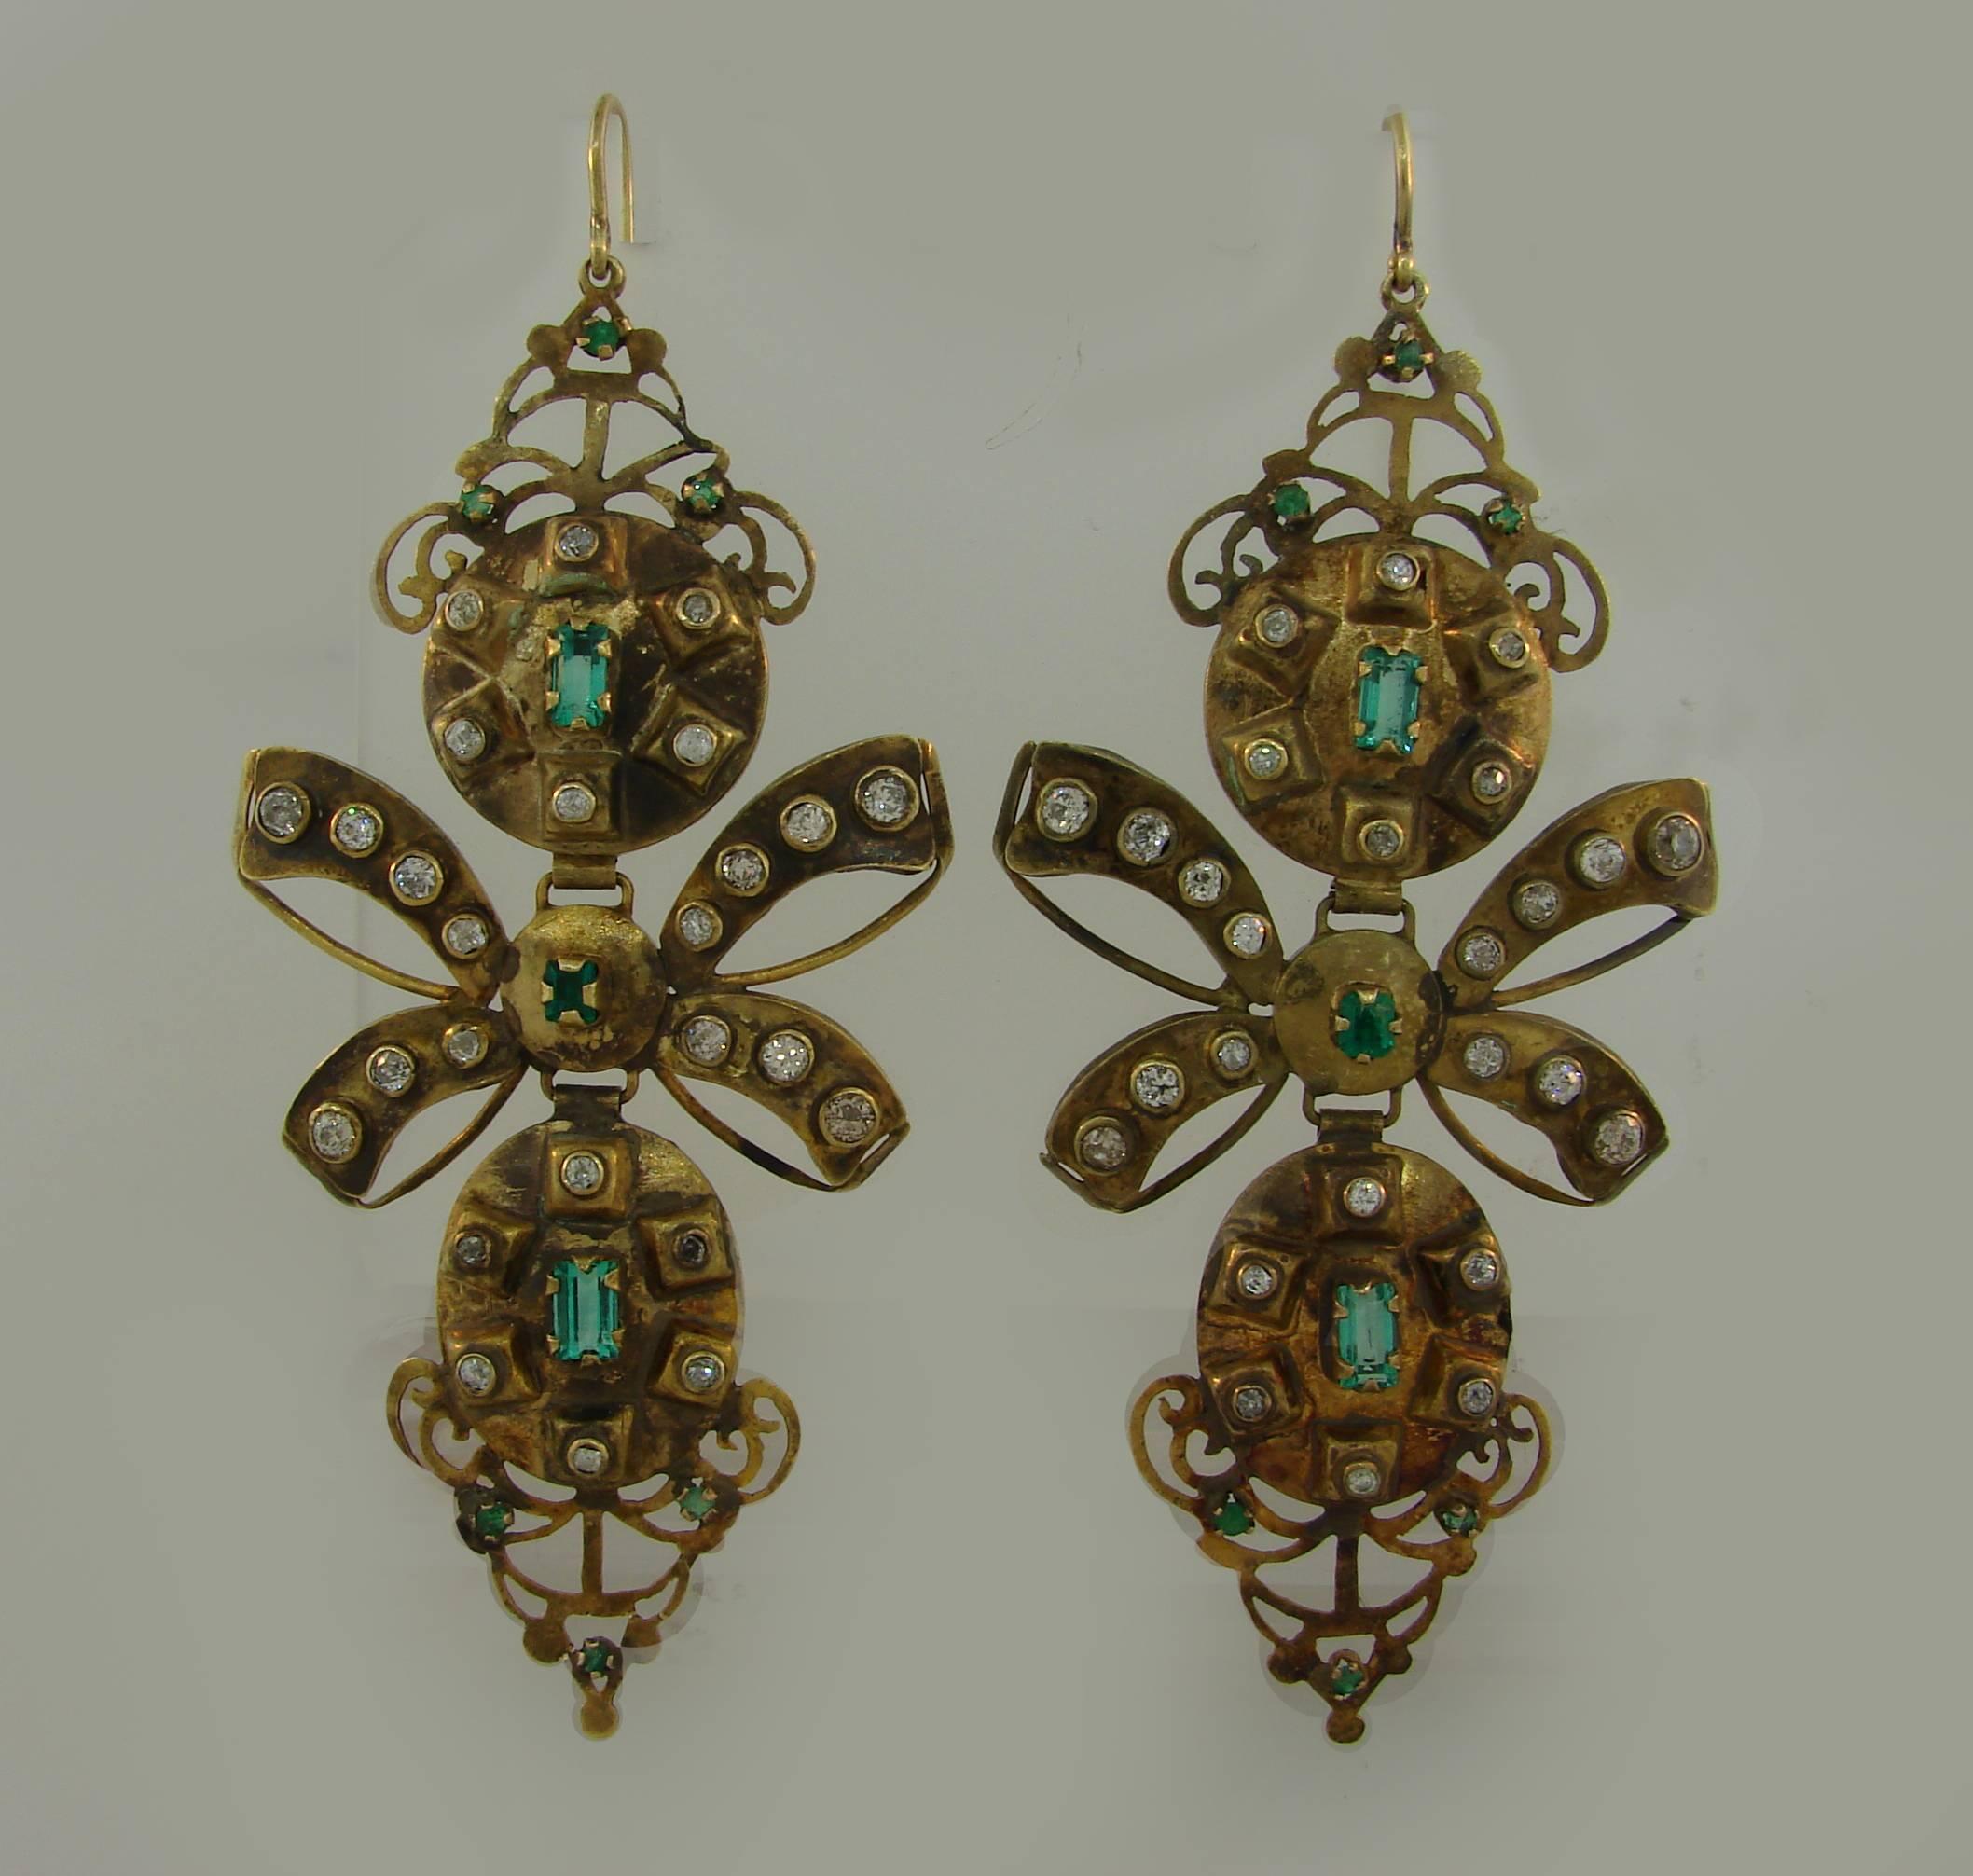 Dramatic yet wearable earrings created in the 1800s. 
They are made of 12 karat (tested) yellow gold and set with emeralds and old mine cut diamonds. Aged patina on gold accentuates antiquity of the earrings, the emerald cut of the emeralds keeps